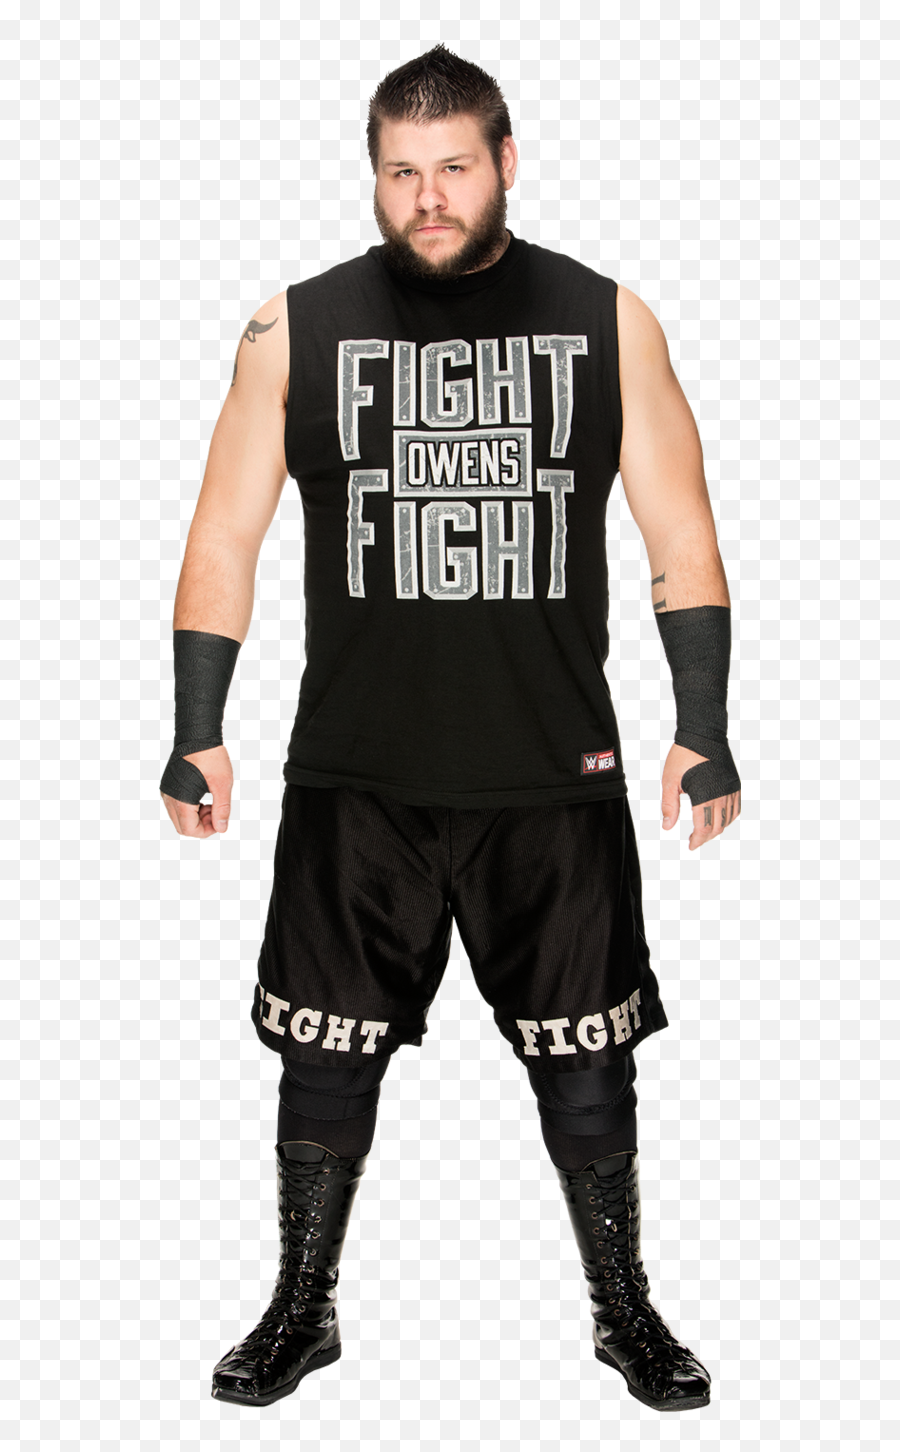 Kevin Owens Png Images In - Kevin Owens Royal Rumble 2017,Kevin Owens Png